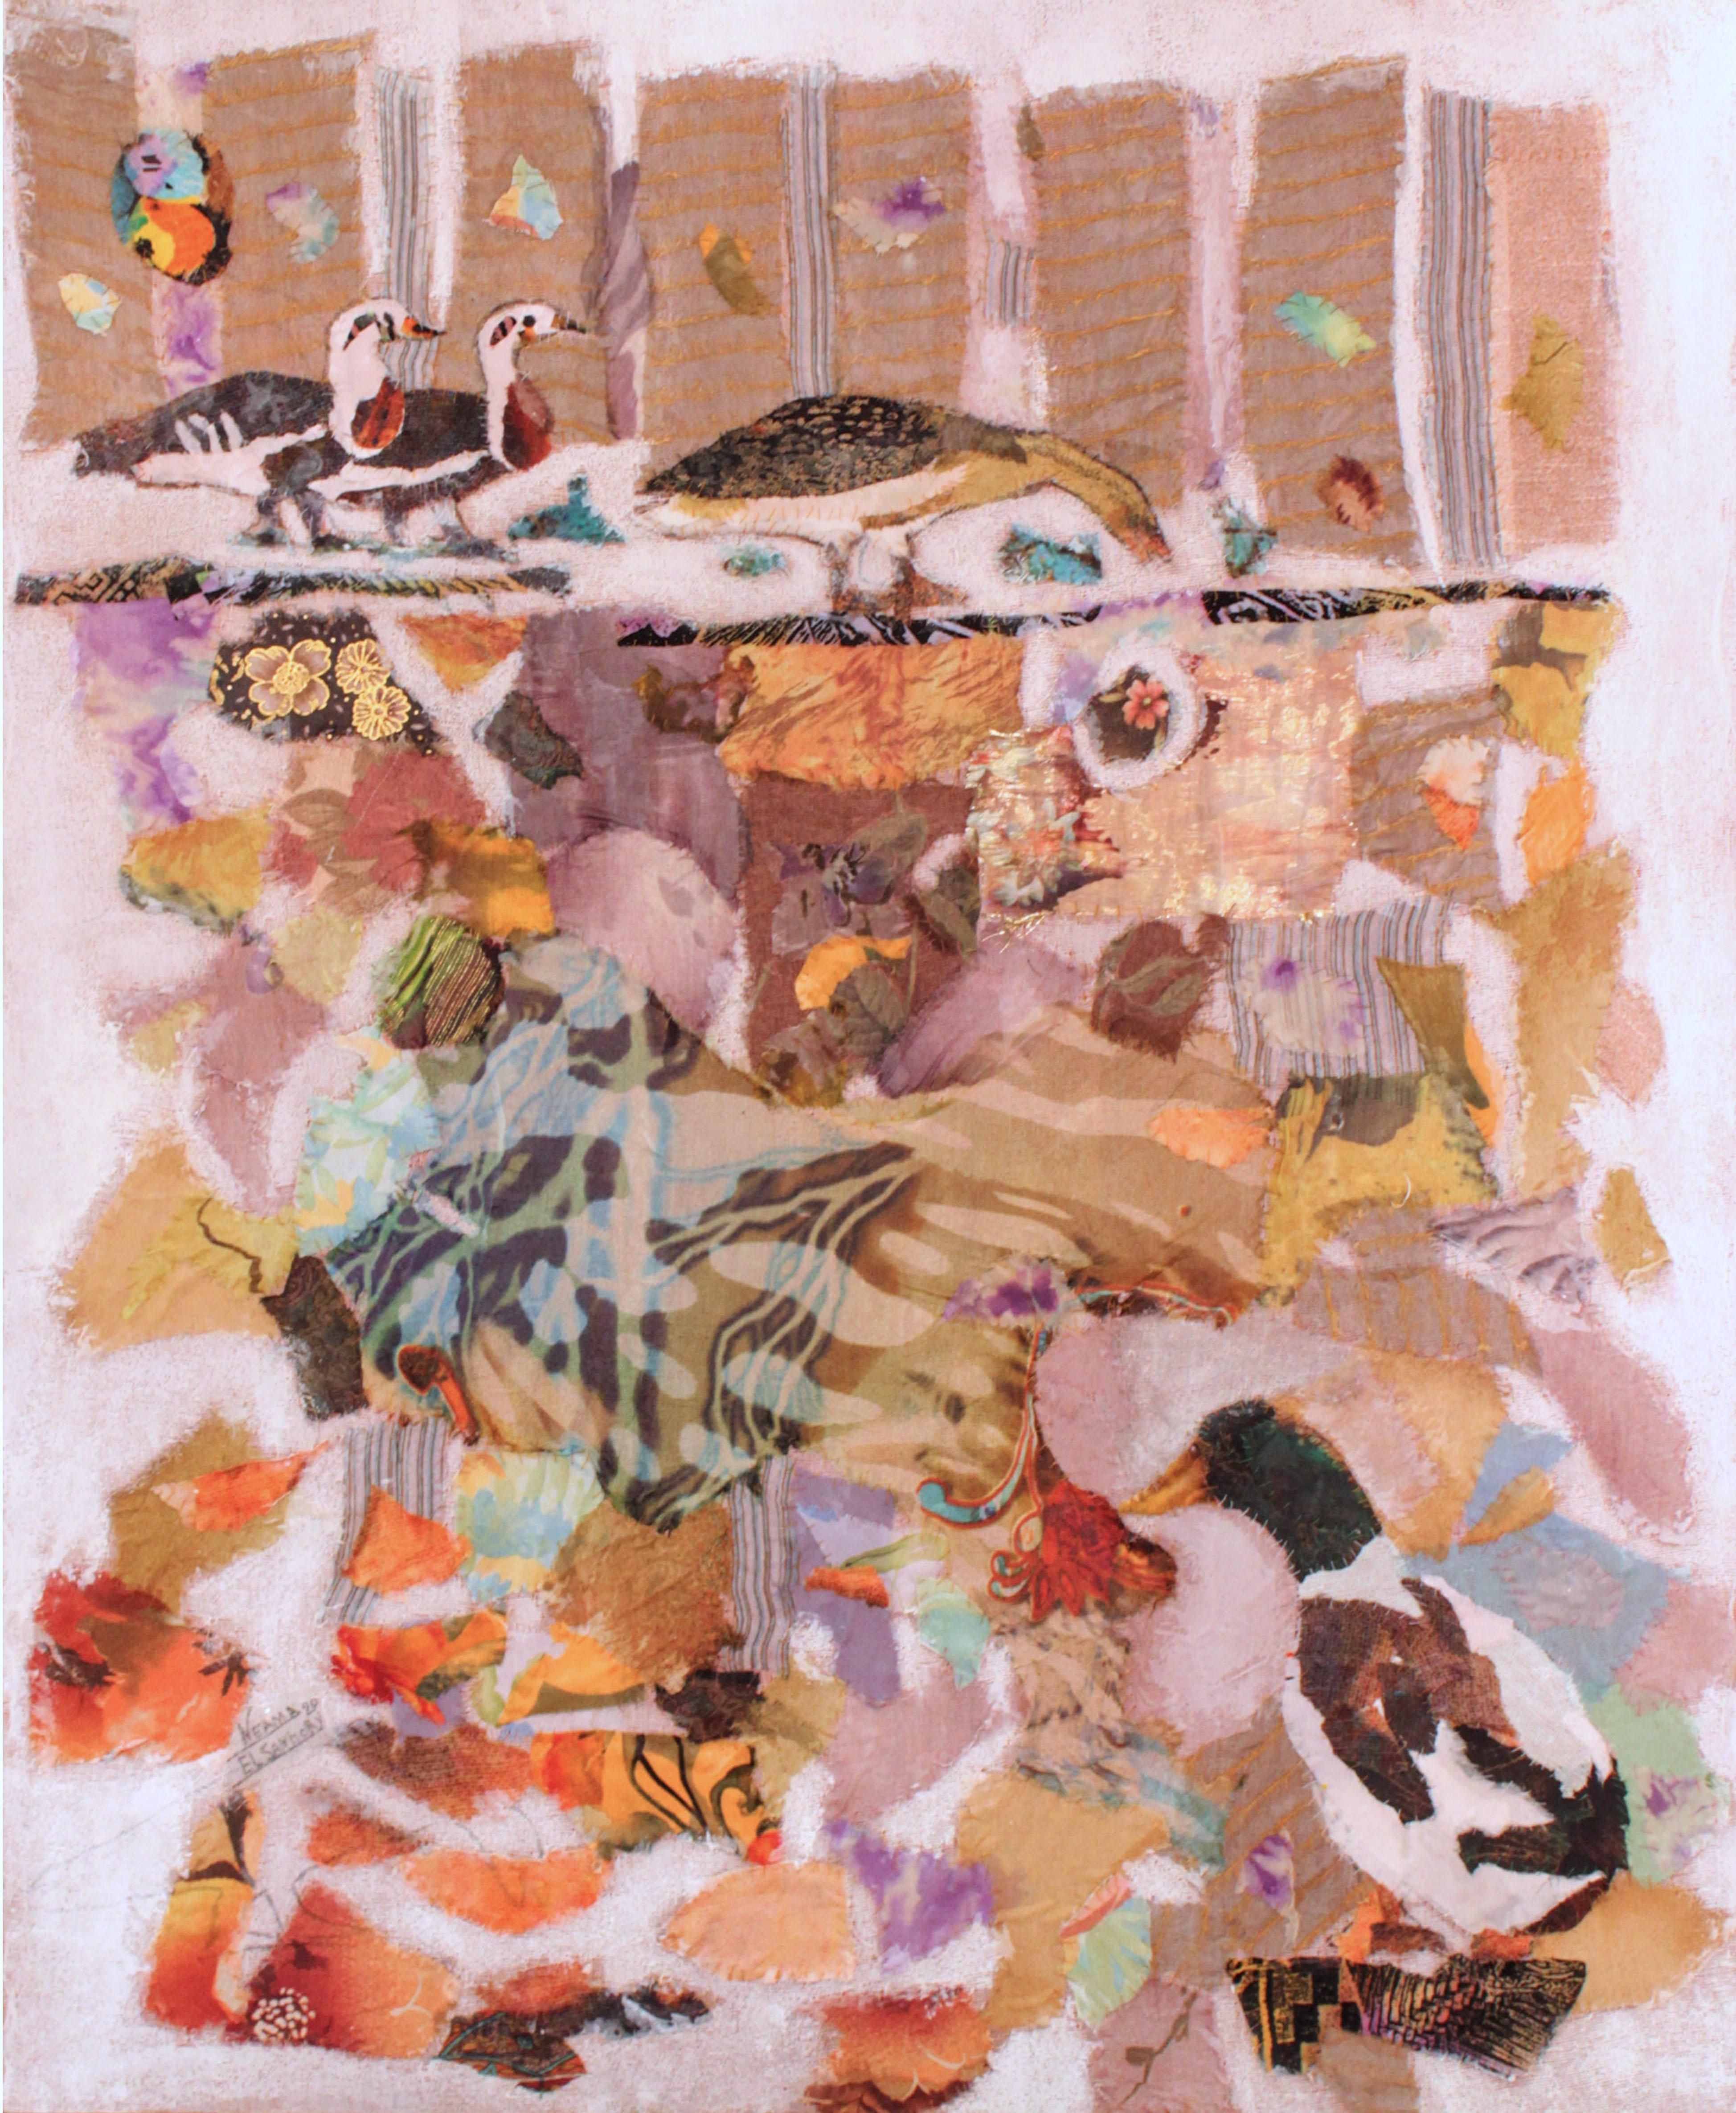 "Waterfowl" Abstract Collage 39" x 31" inch by Neama El Sanhoury